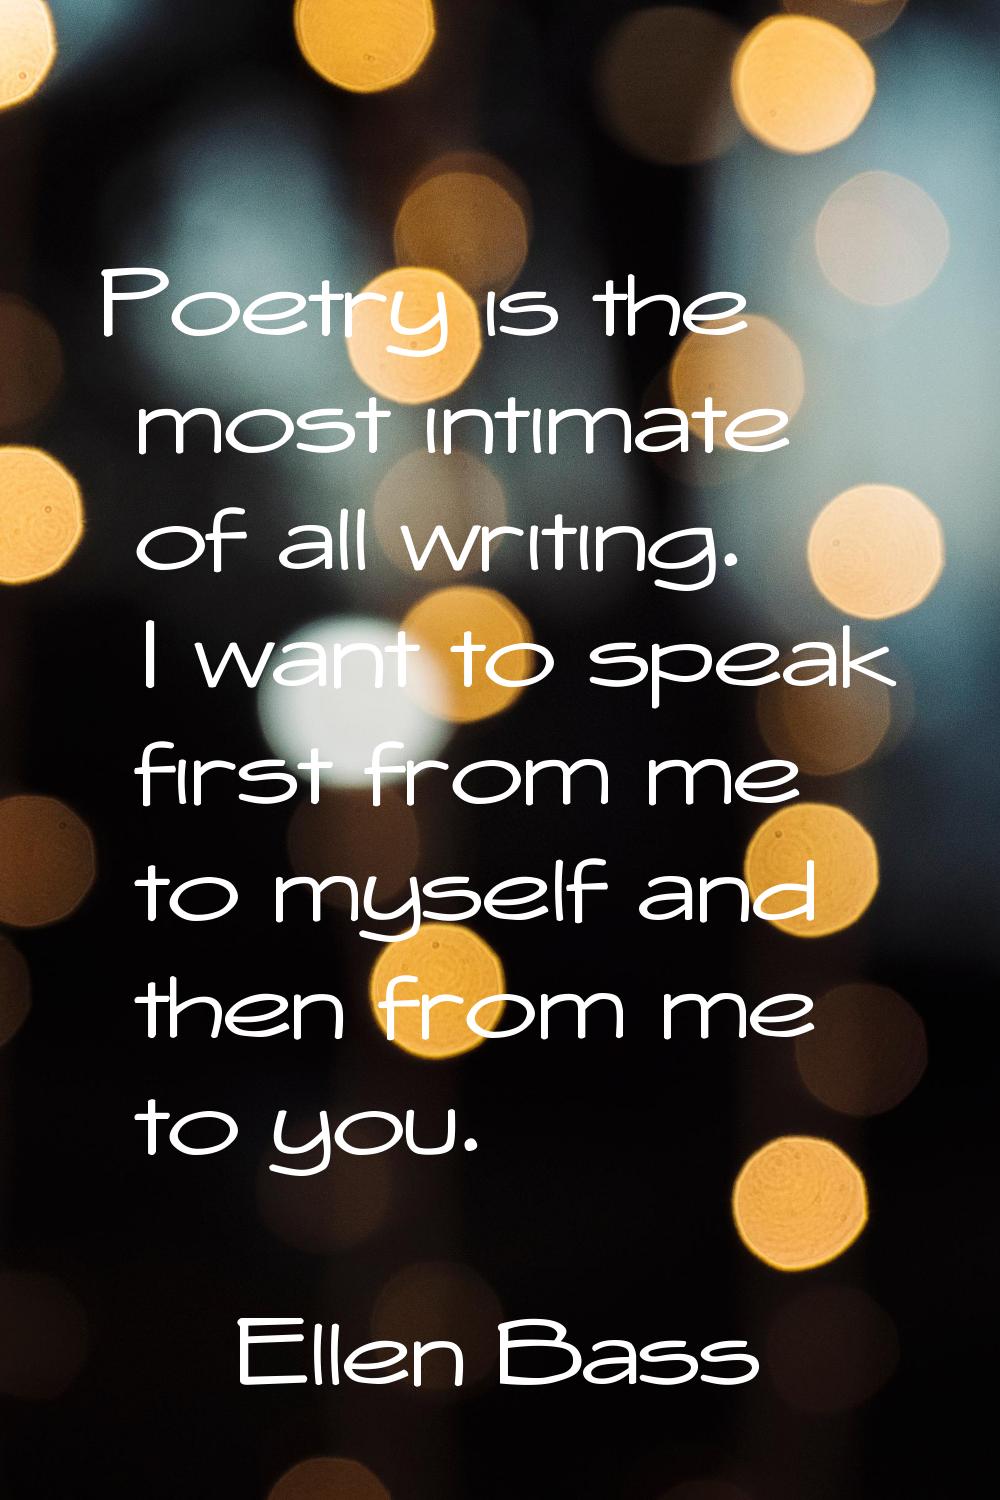 Poetry is the most intimate of all writing. I want to speak first from me to myself and then from m